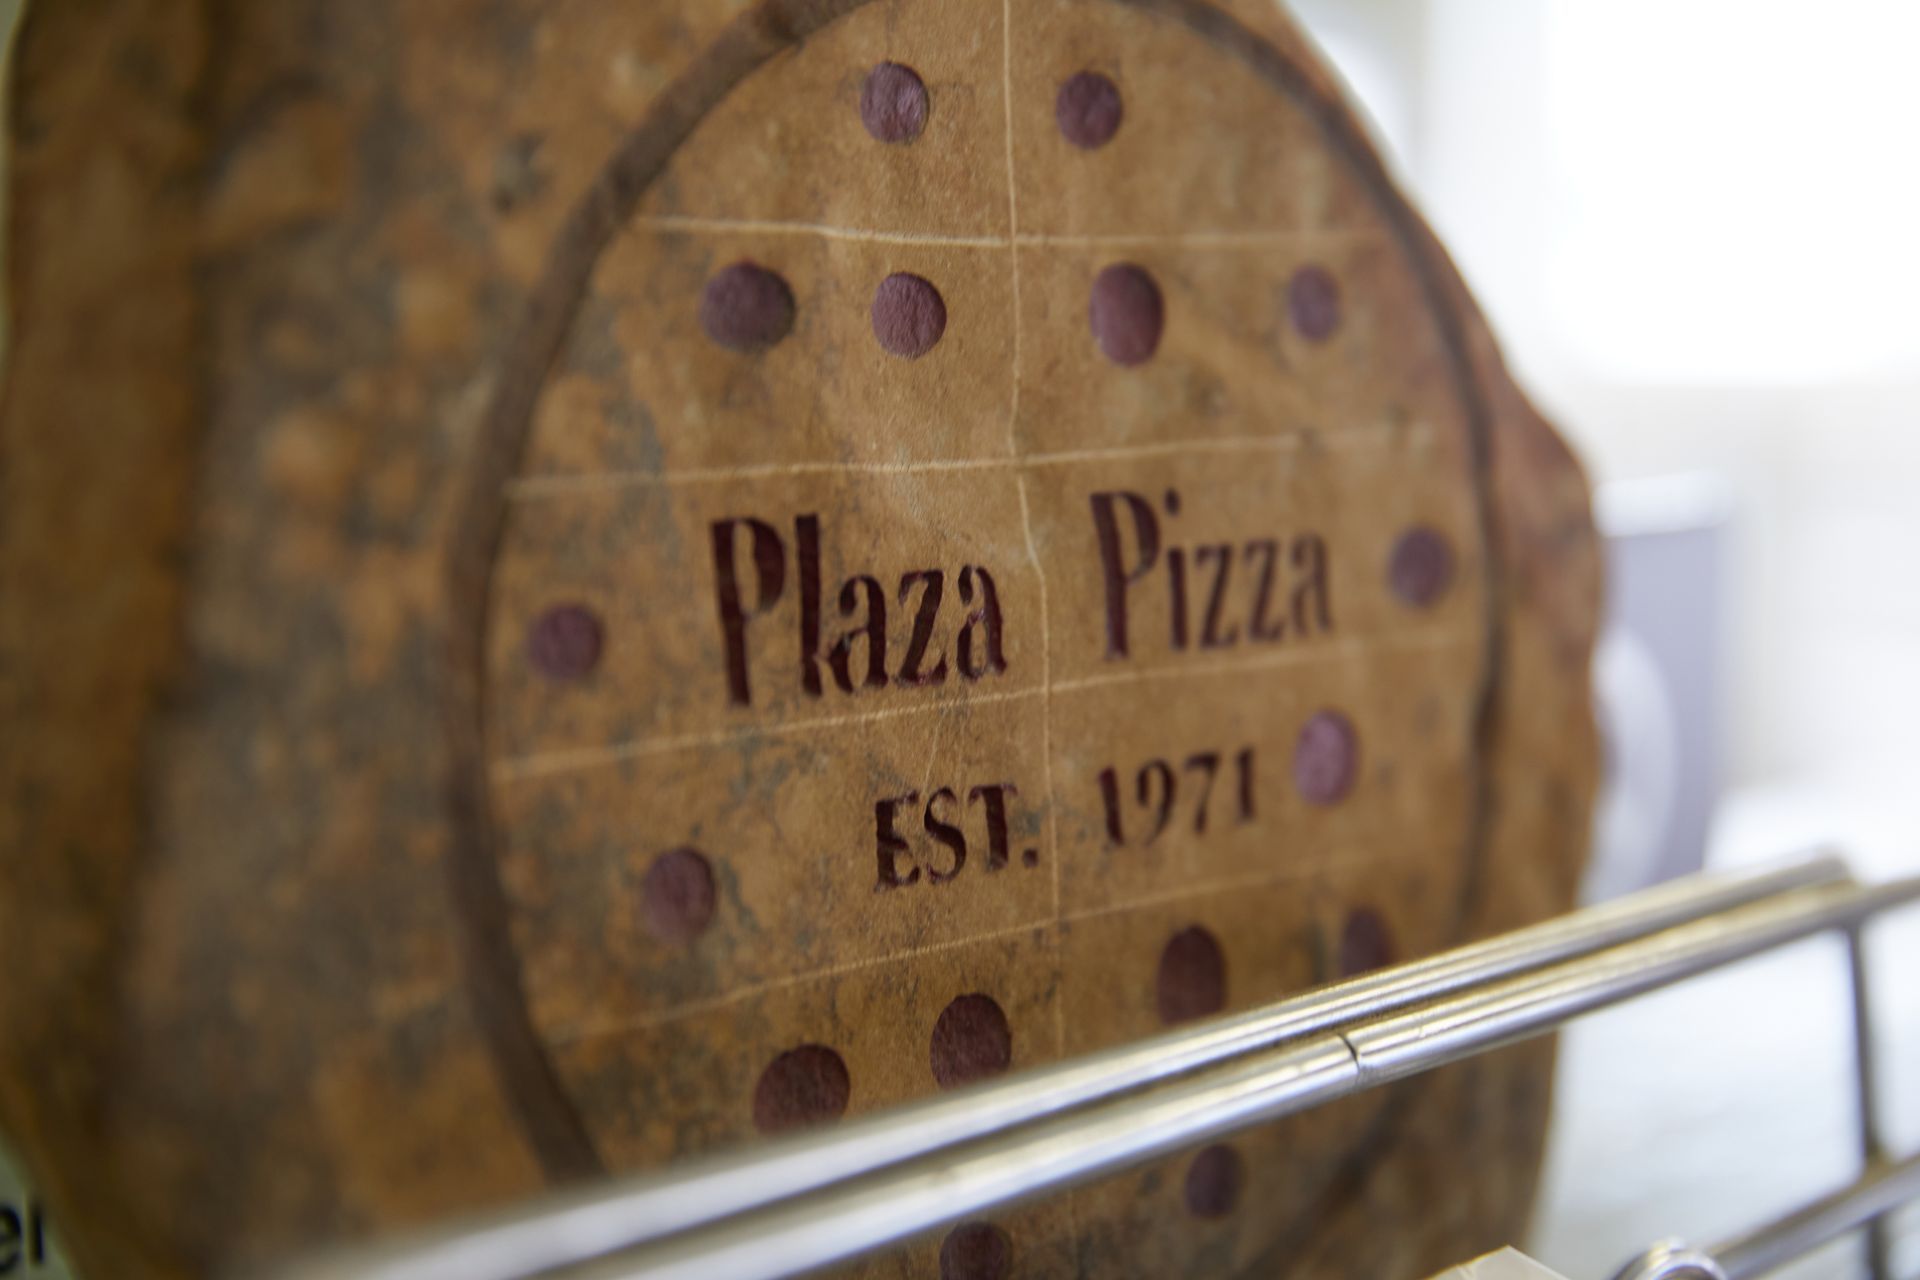 A close up of a pizza that says plaza pizza on it